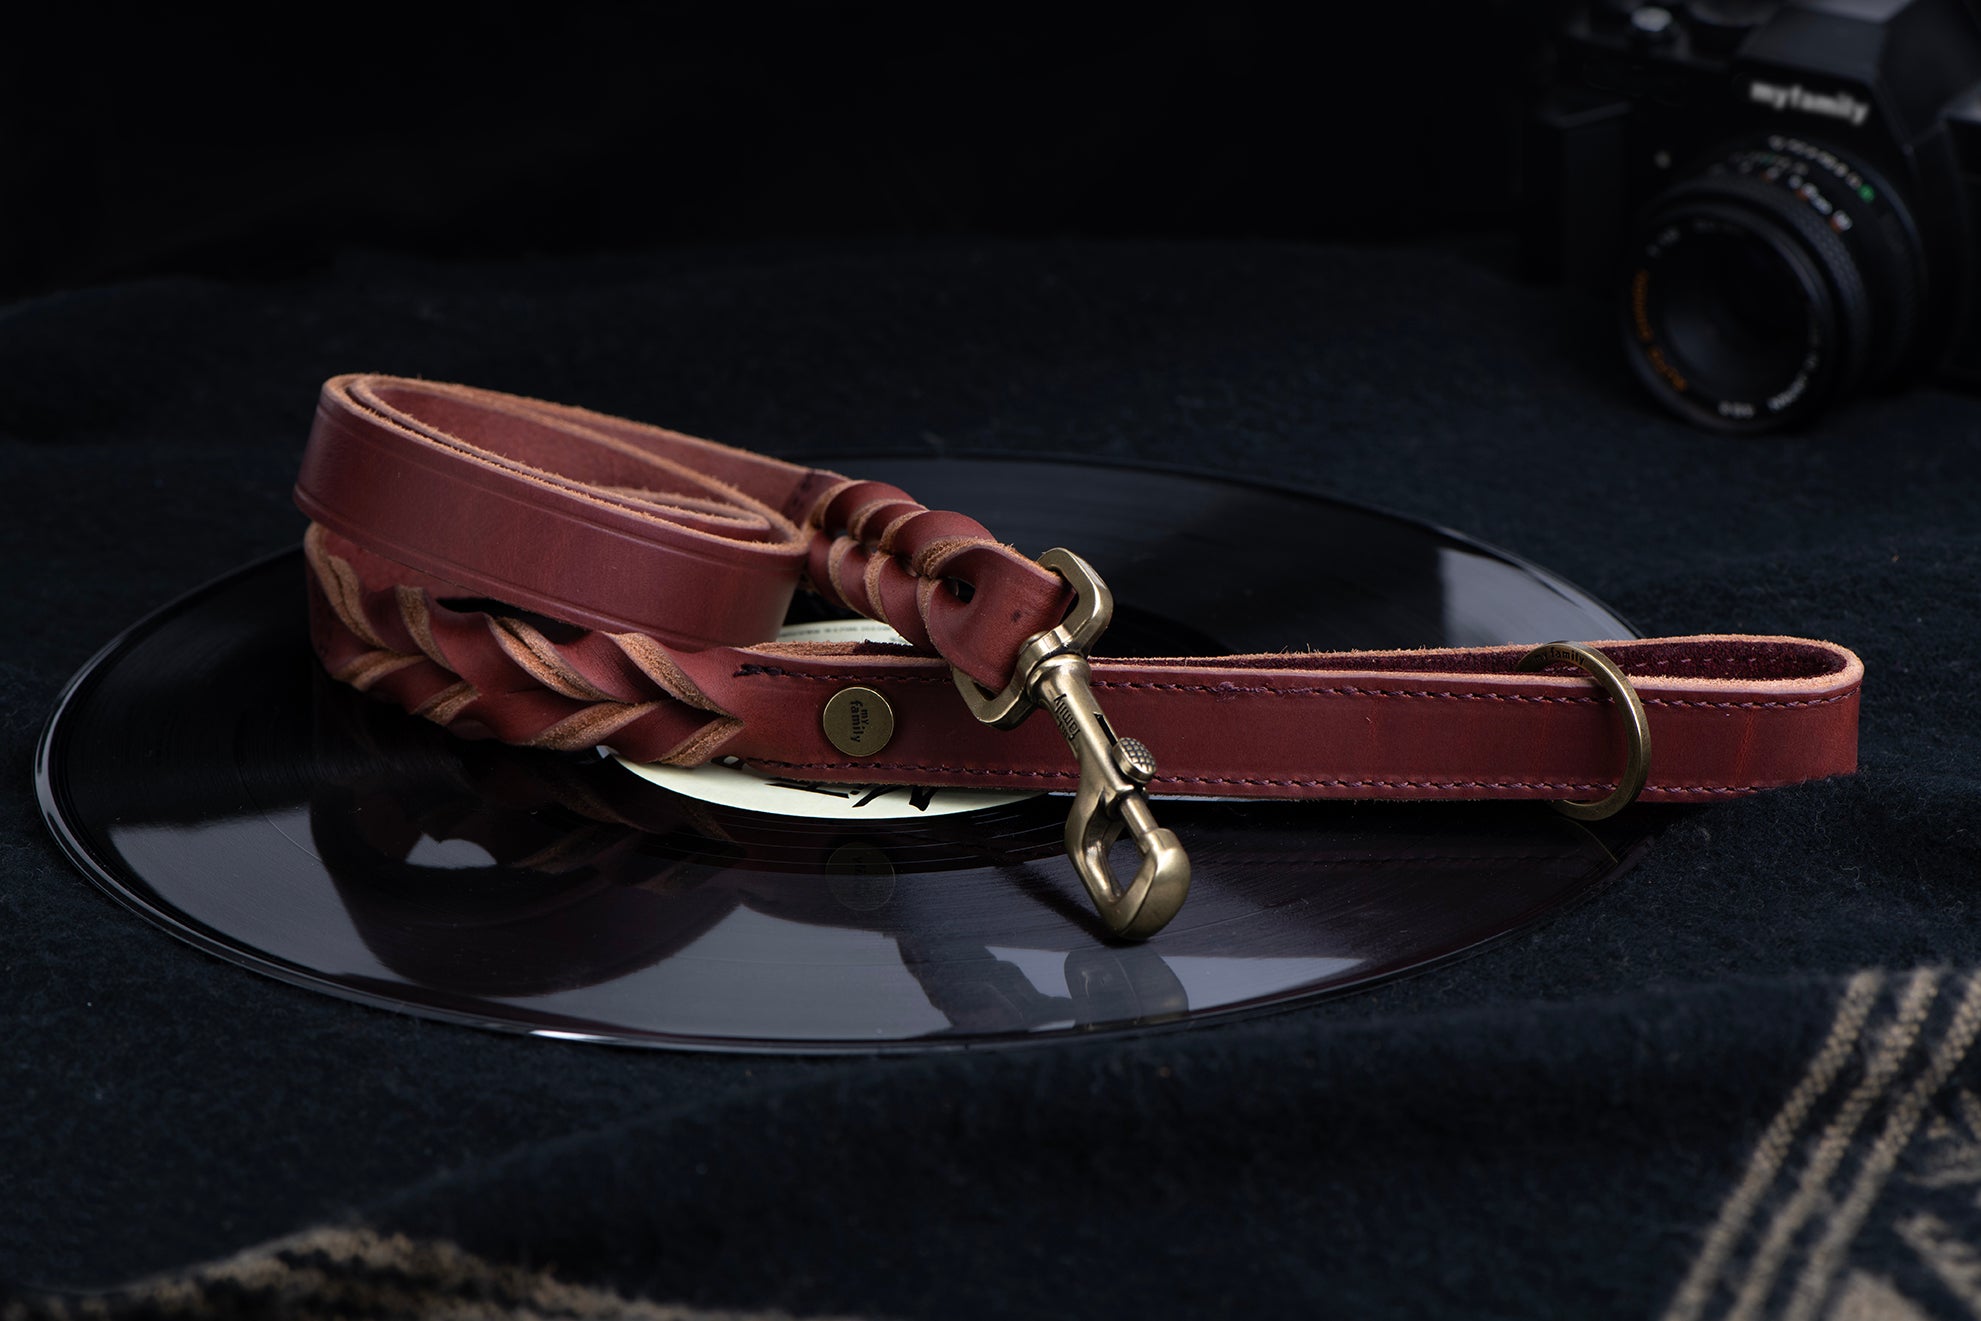 ASCOT COLLARBrown Leather Dog Collar